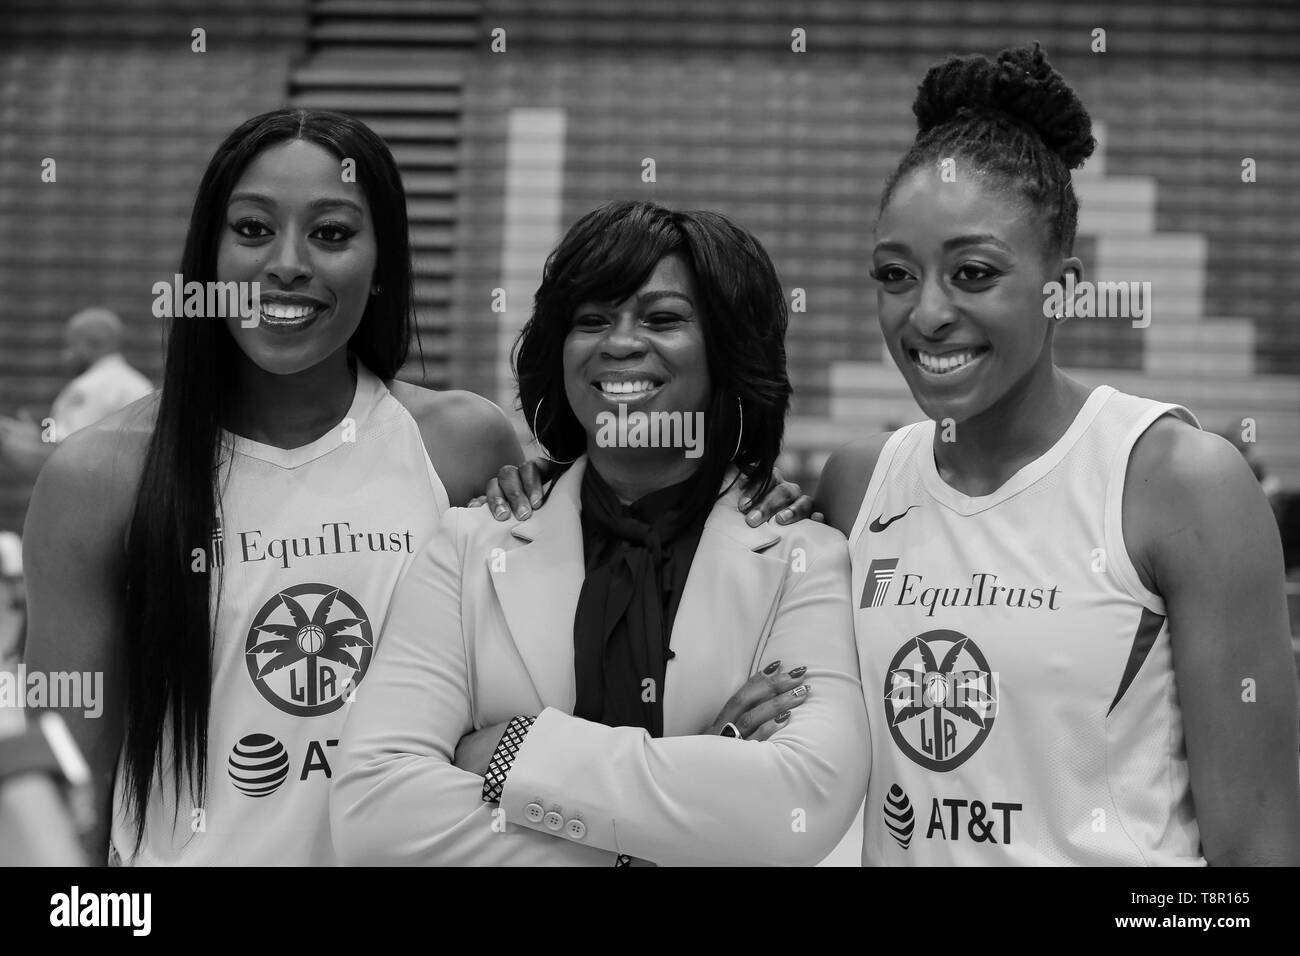 WNBA 2019: Los Angeles Sparks forward Nneka Ogwumike #30, Los Angeles Sparks forward Chiney Ogwumike #13 with GM Penny Toler during Los Angeles Sparks Media Day May 14, 2019 at Los Angeles Southwest College. (Photo by Jevone Moore) Stock Photo